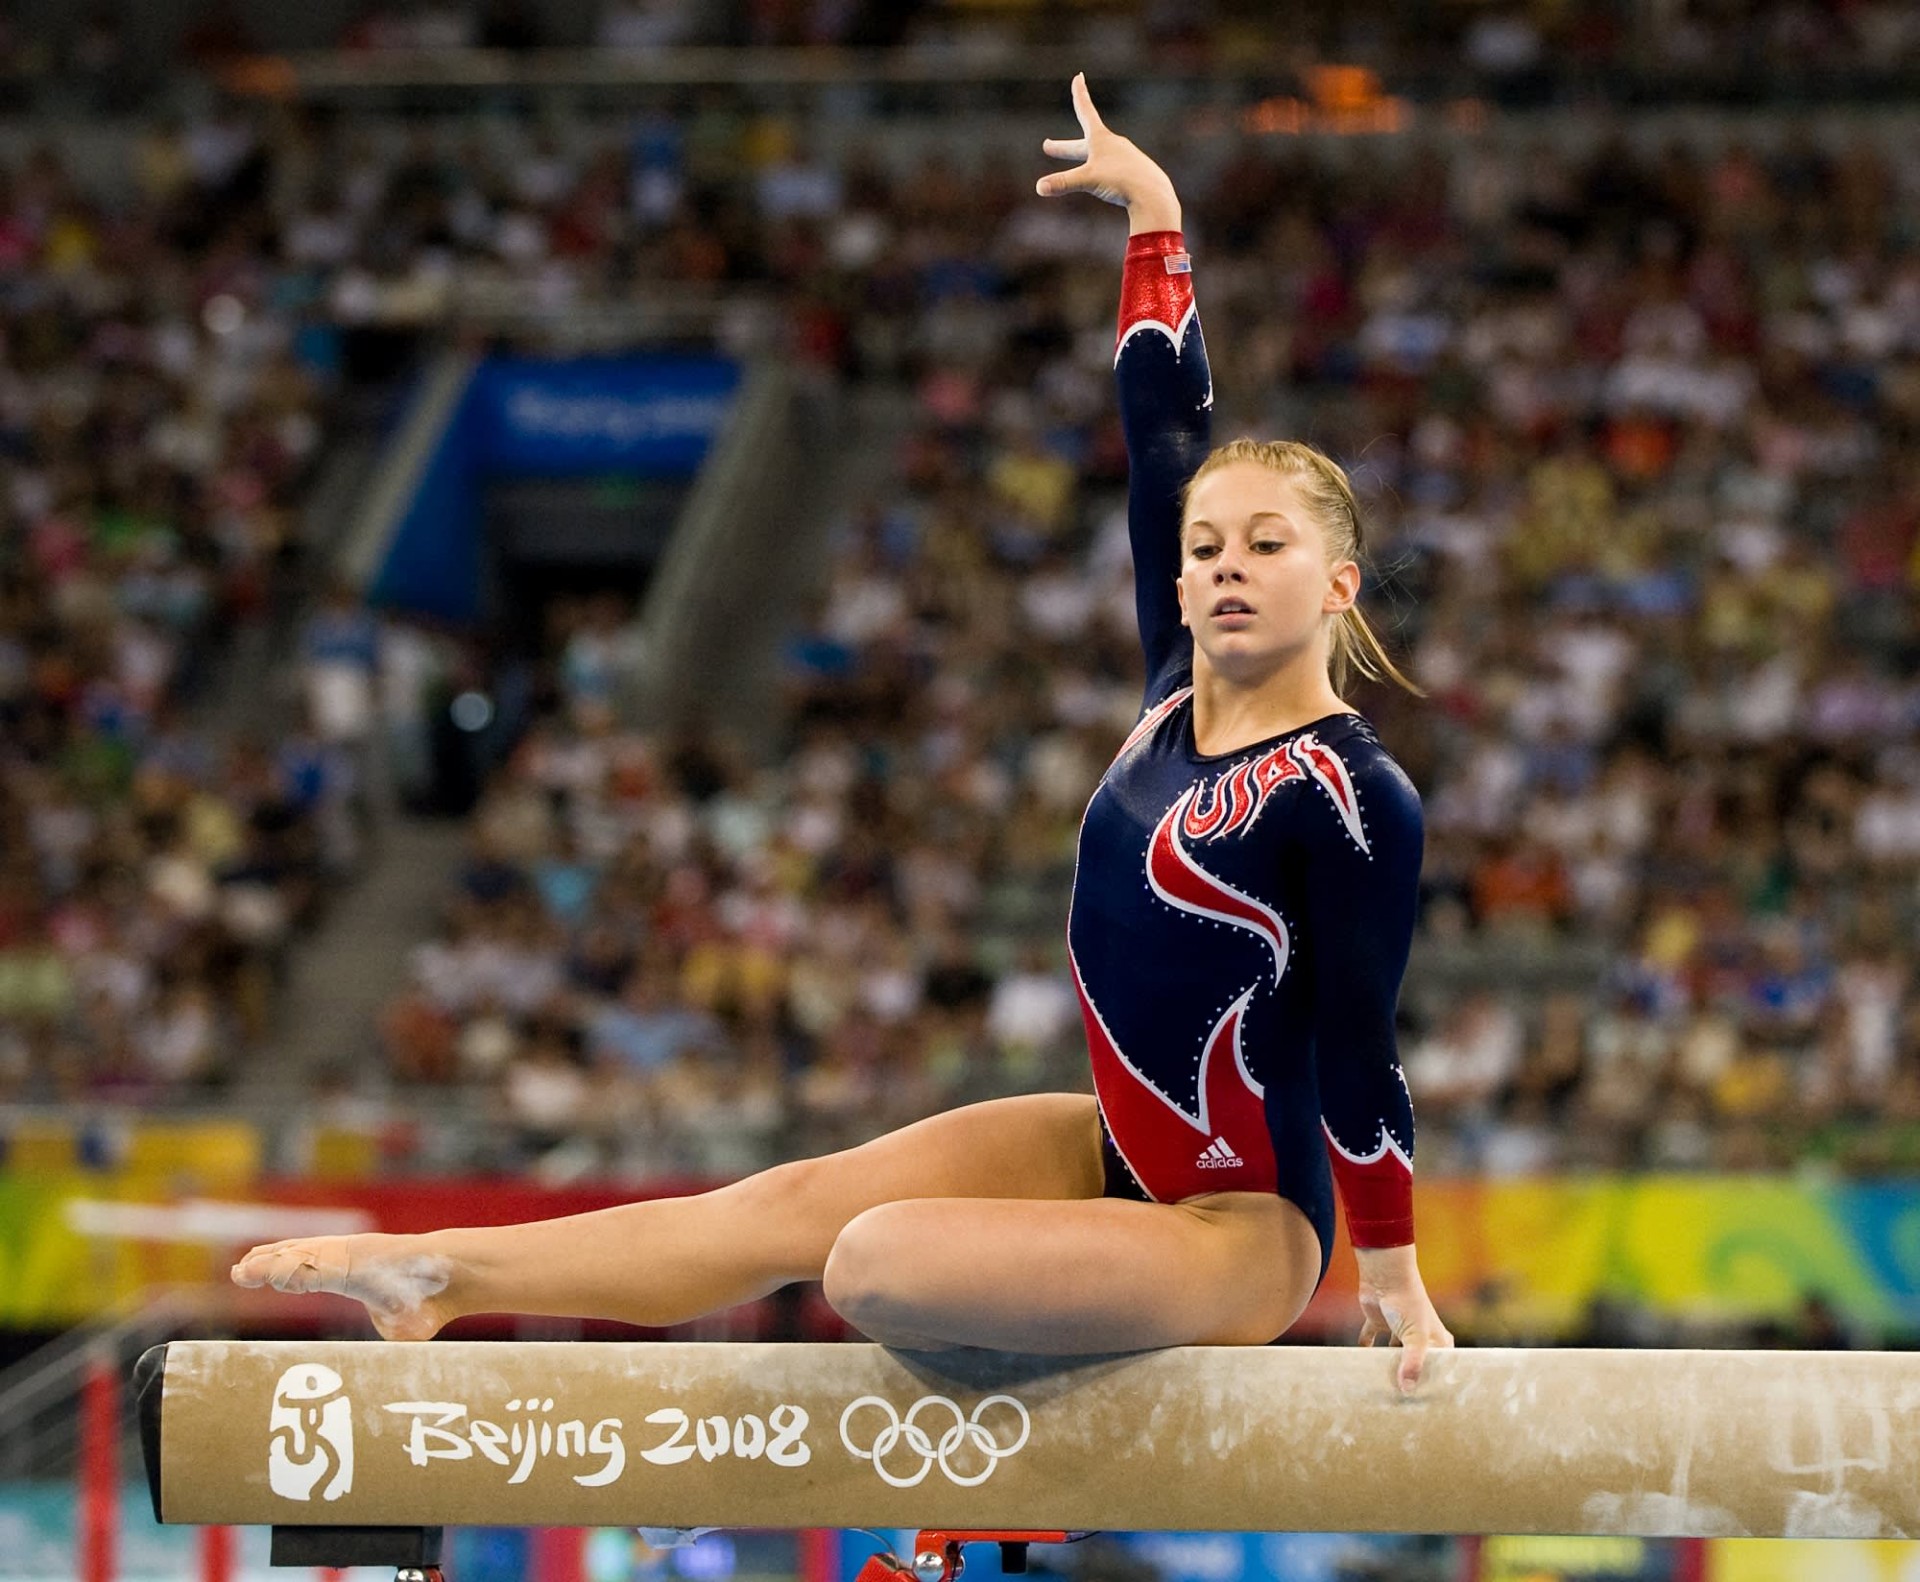 Top 10 Hottest and Beautiful Female Gymnasts In The World